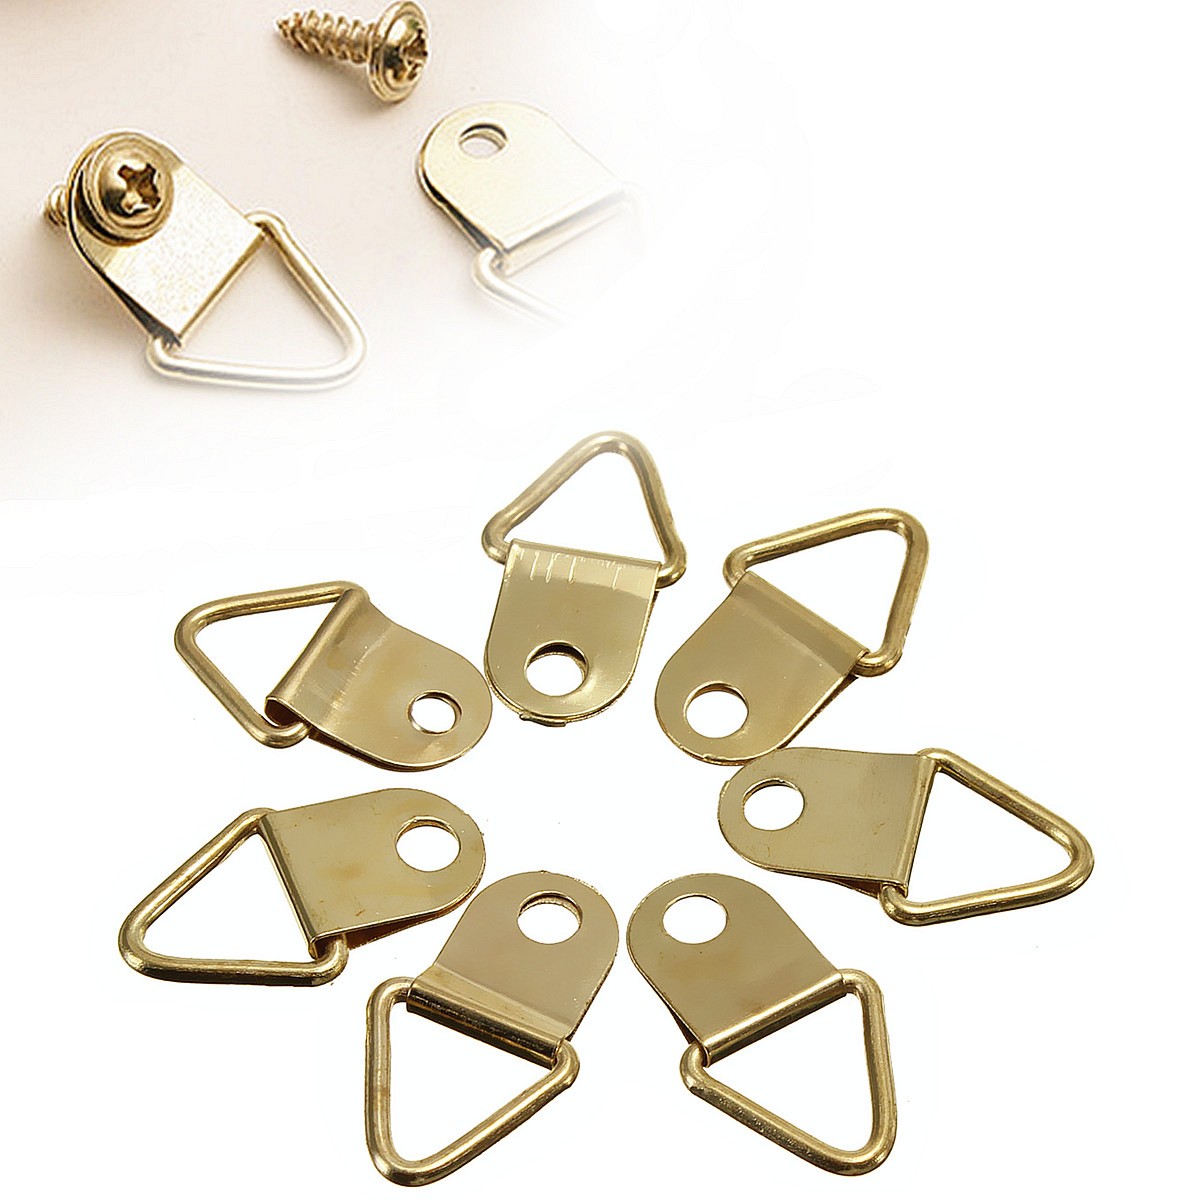 50Pcs-Copper-Triangle-Photo-Picture-Frame-Wall-Mount-Hook-Hanger-Ring-1033984-9